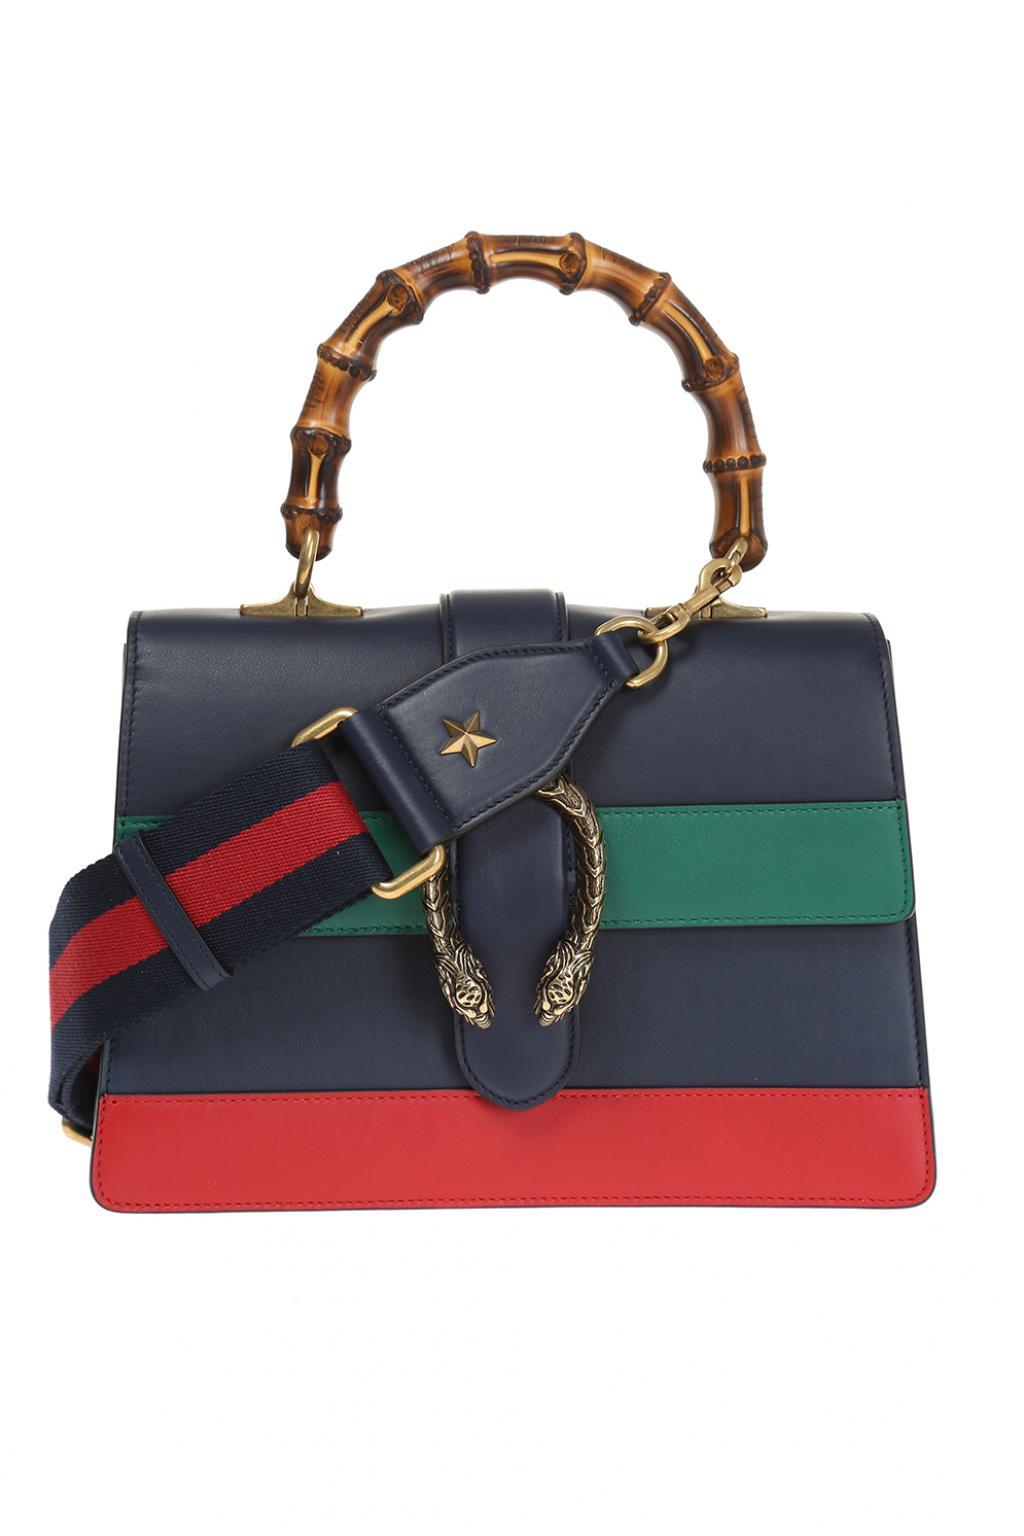 Gucci Dionysus Bamboo Medium Leather Shoulder Bag in Navy Blue (Blue) - Lyst